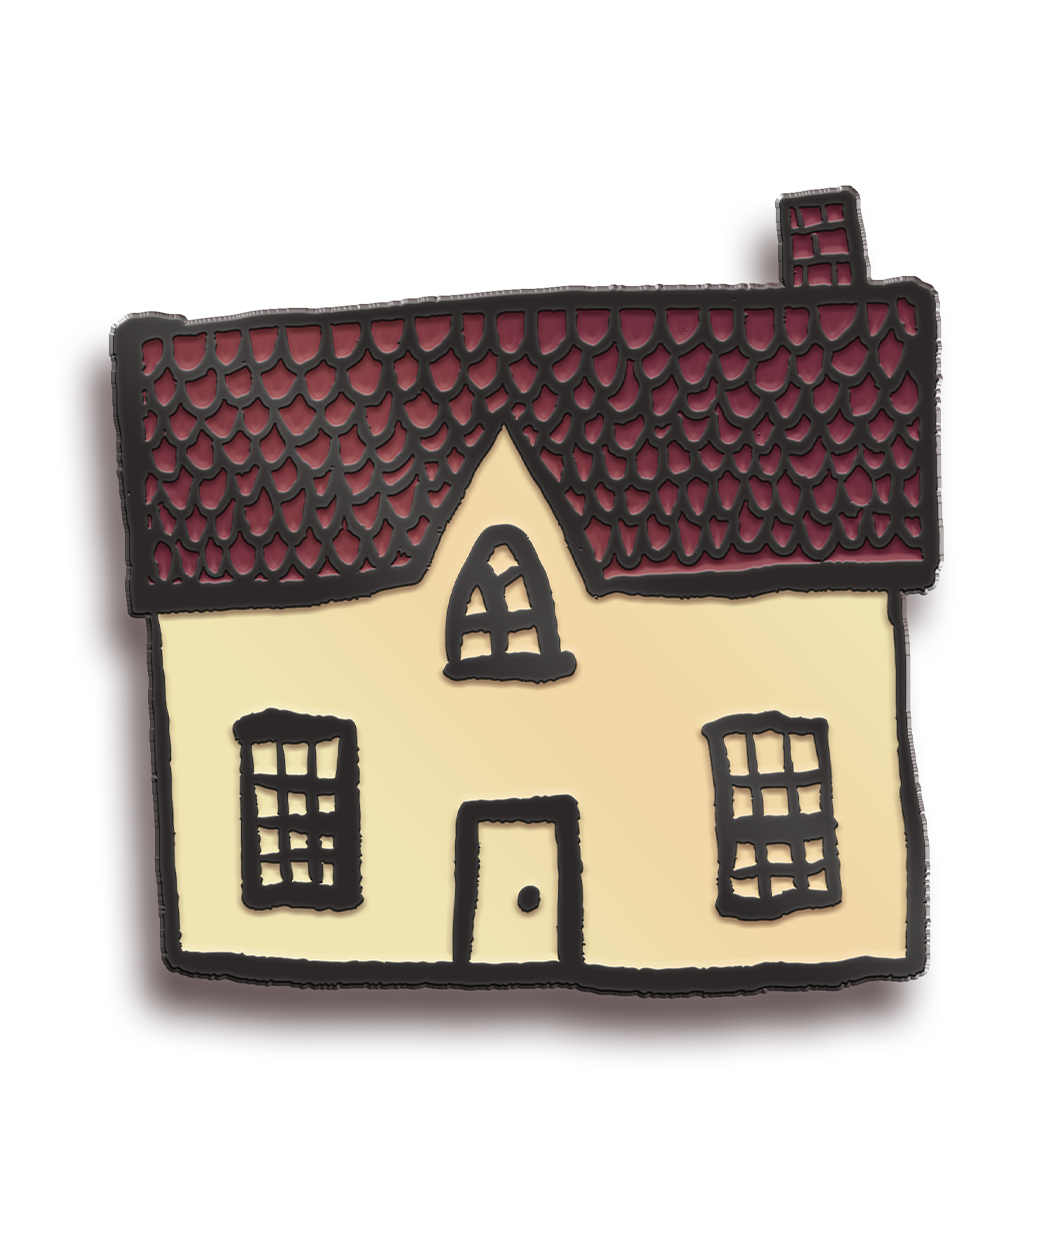 A pin that looks like a drawing of a yellow house with a red shingled roof and black outline of doors and windows - by Ariel Bissett